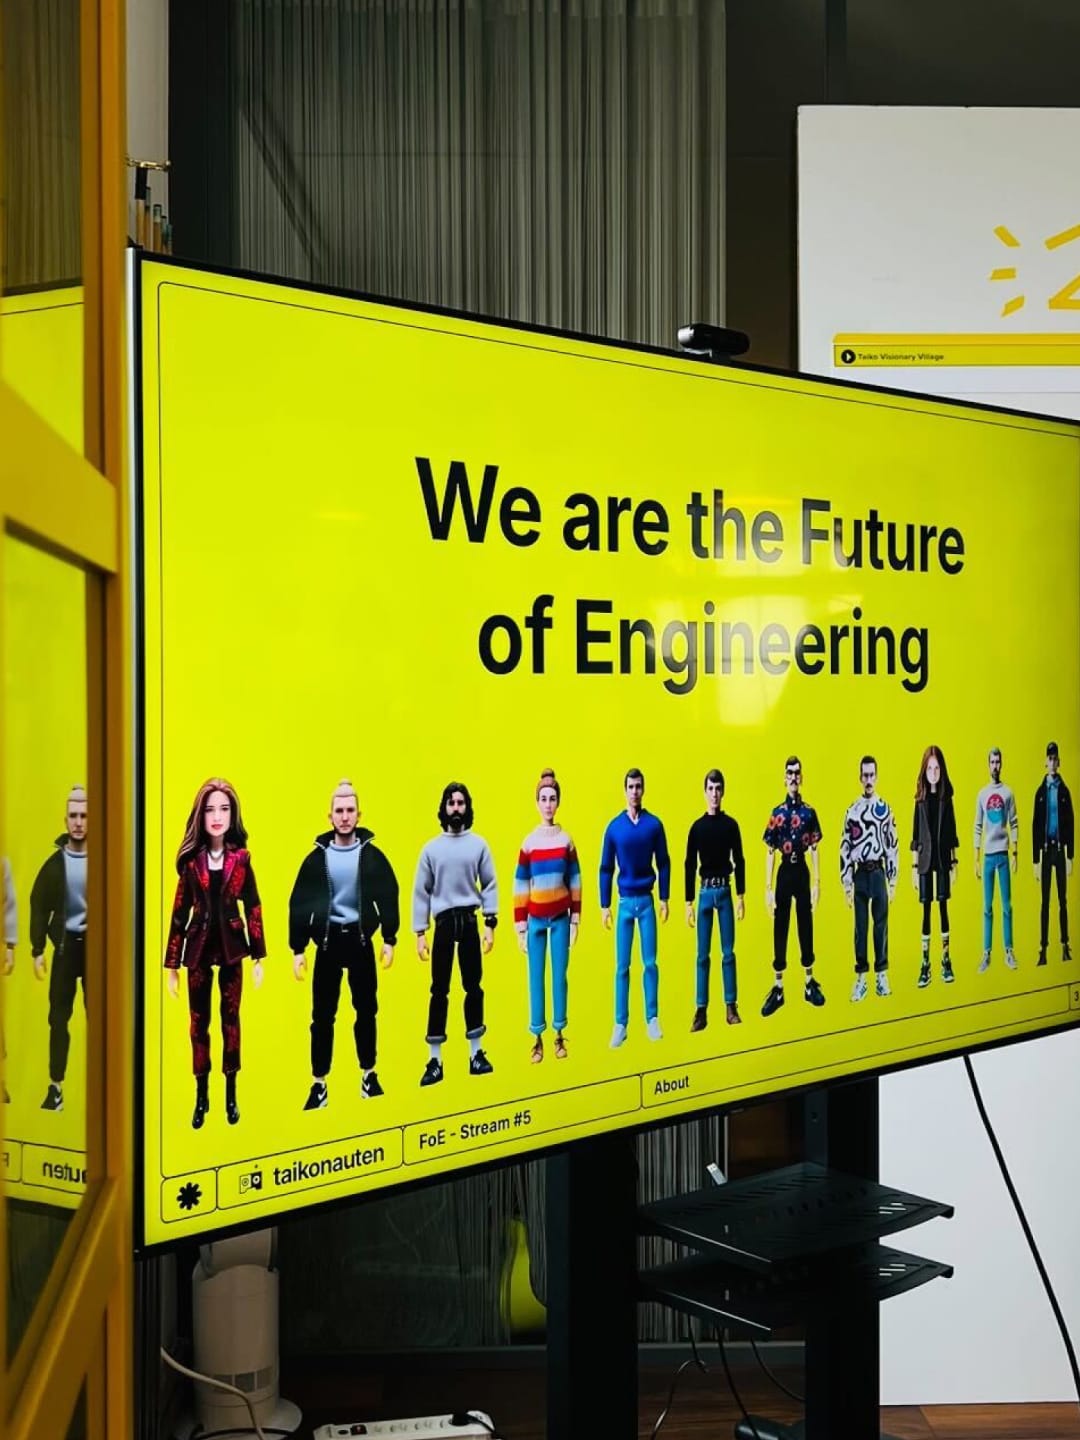 A large screen shows a yellow slide with the title "We are the Future of Engineering".